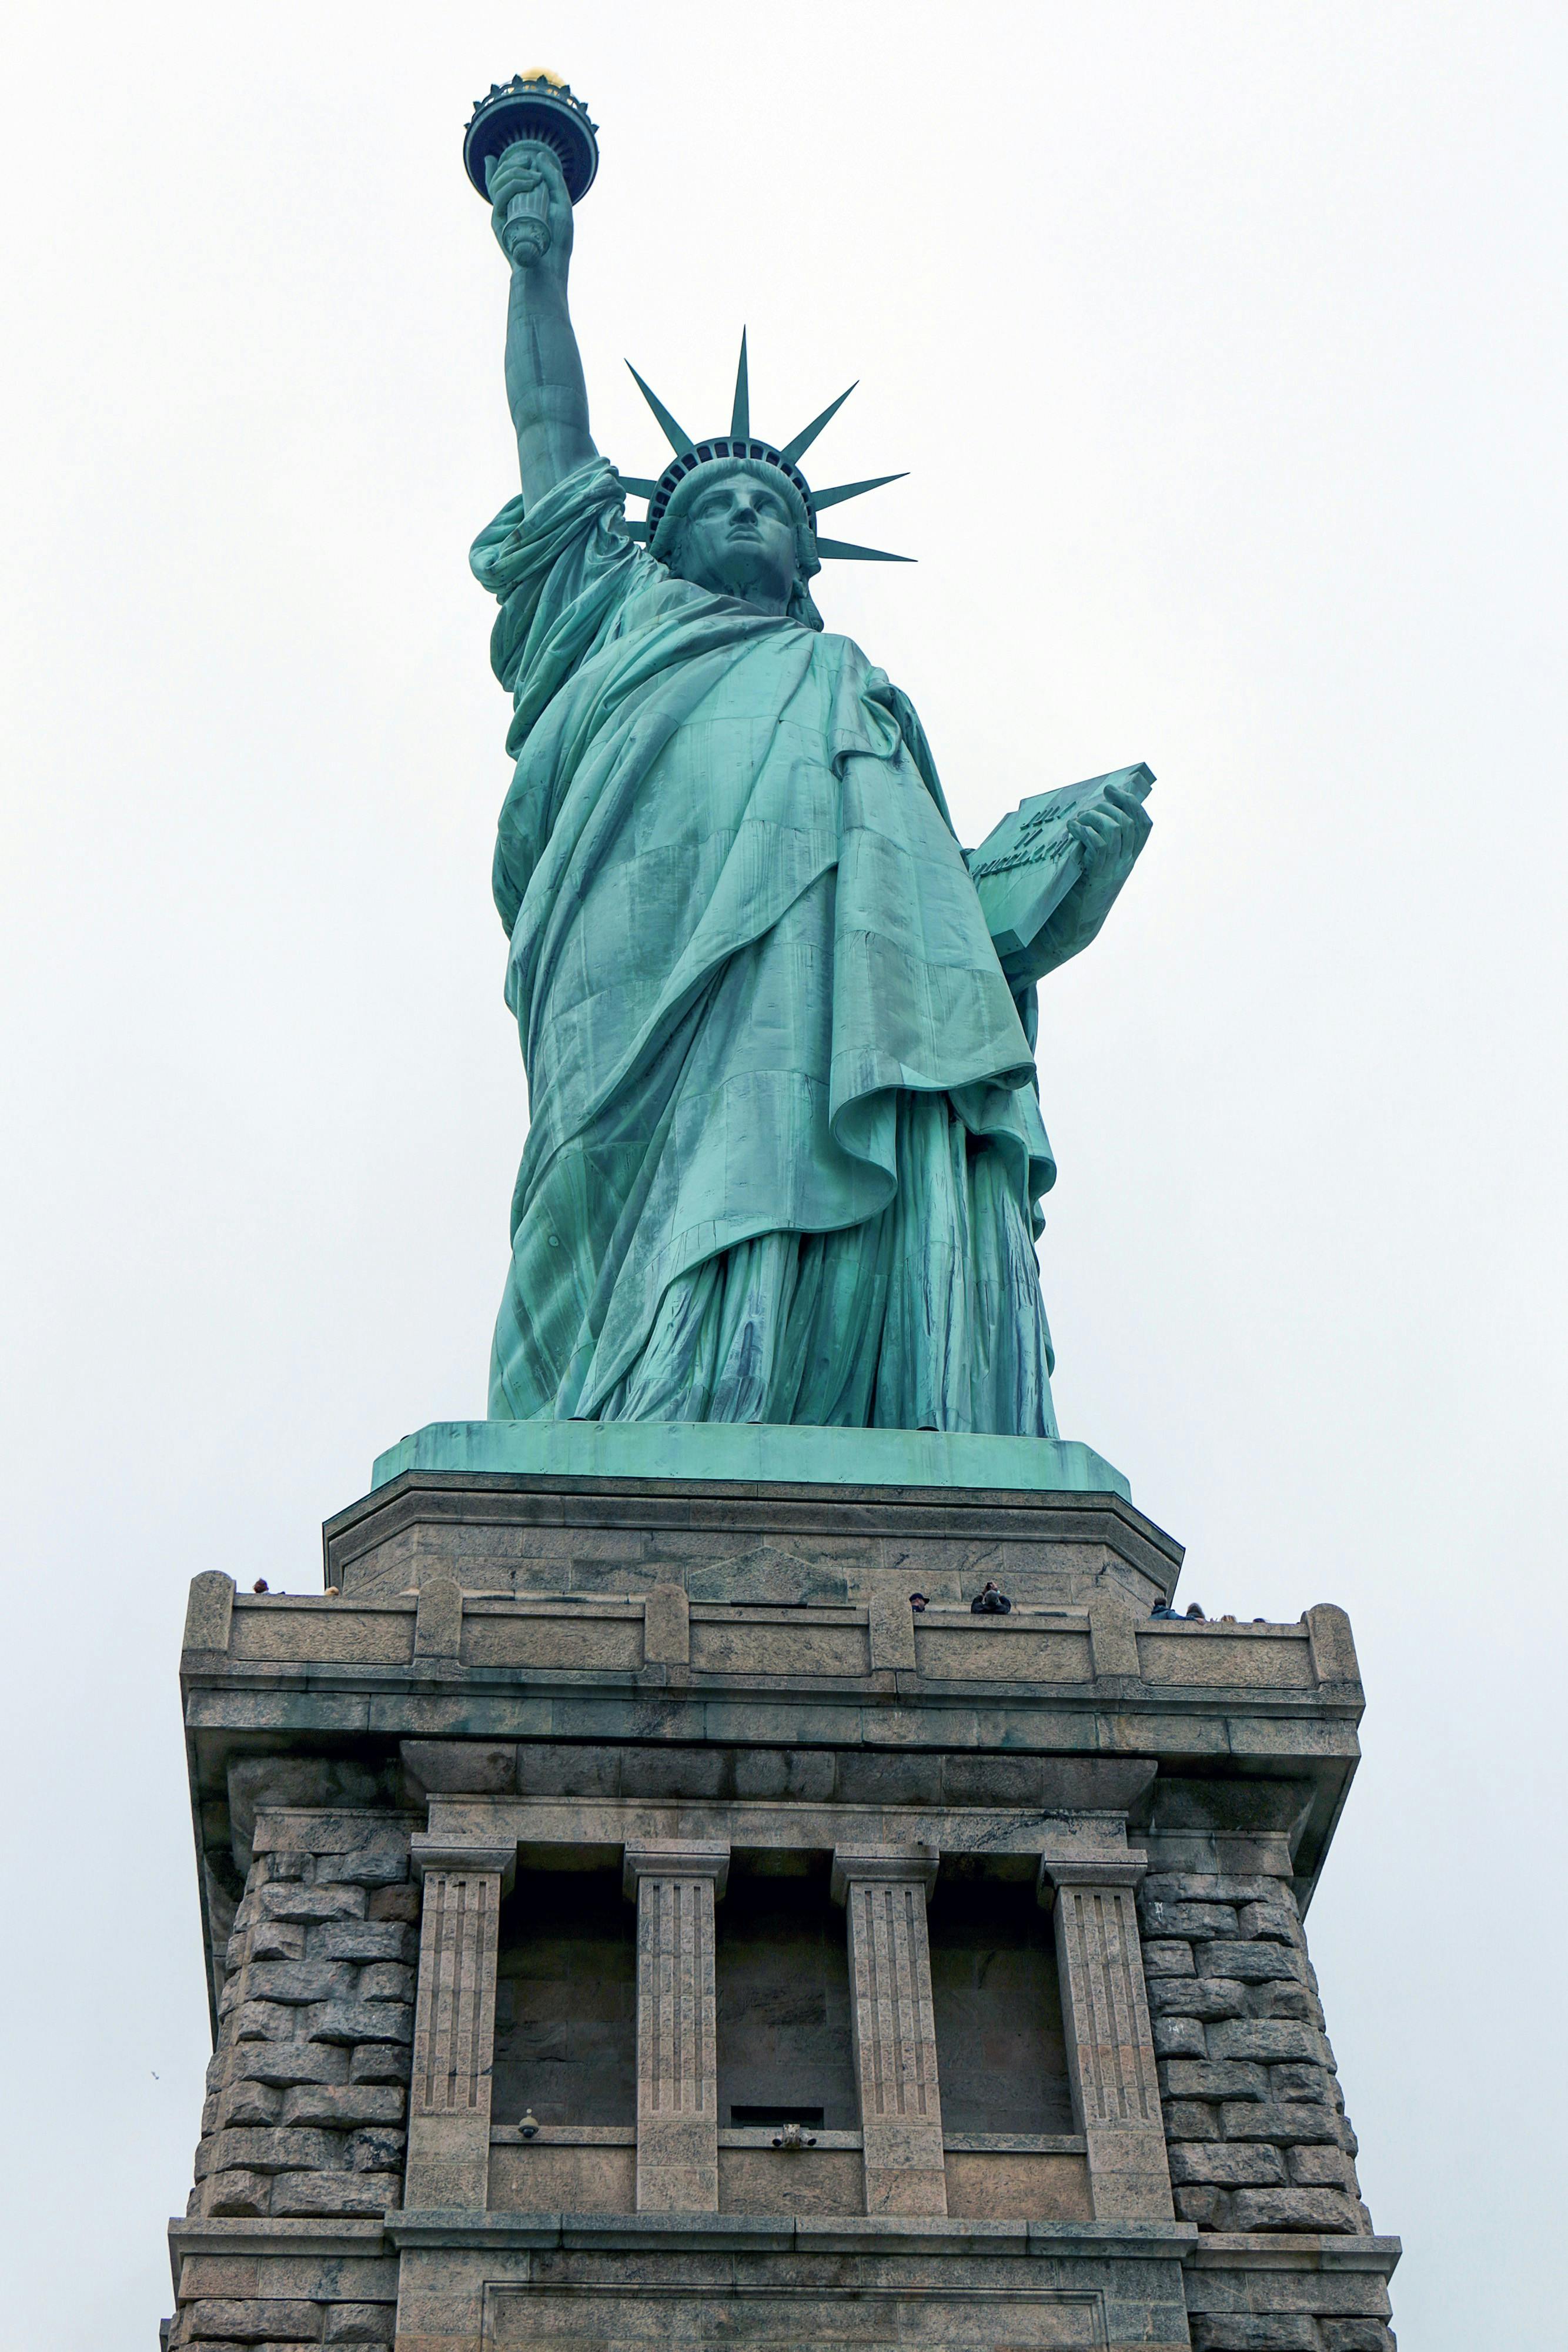 Early Bird tour of the Statue of Liberty and Ellis Island with an expert guide-7